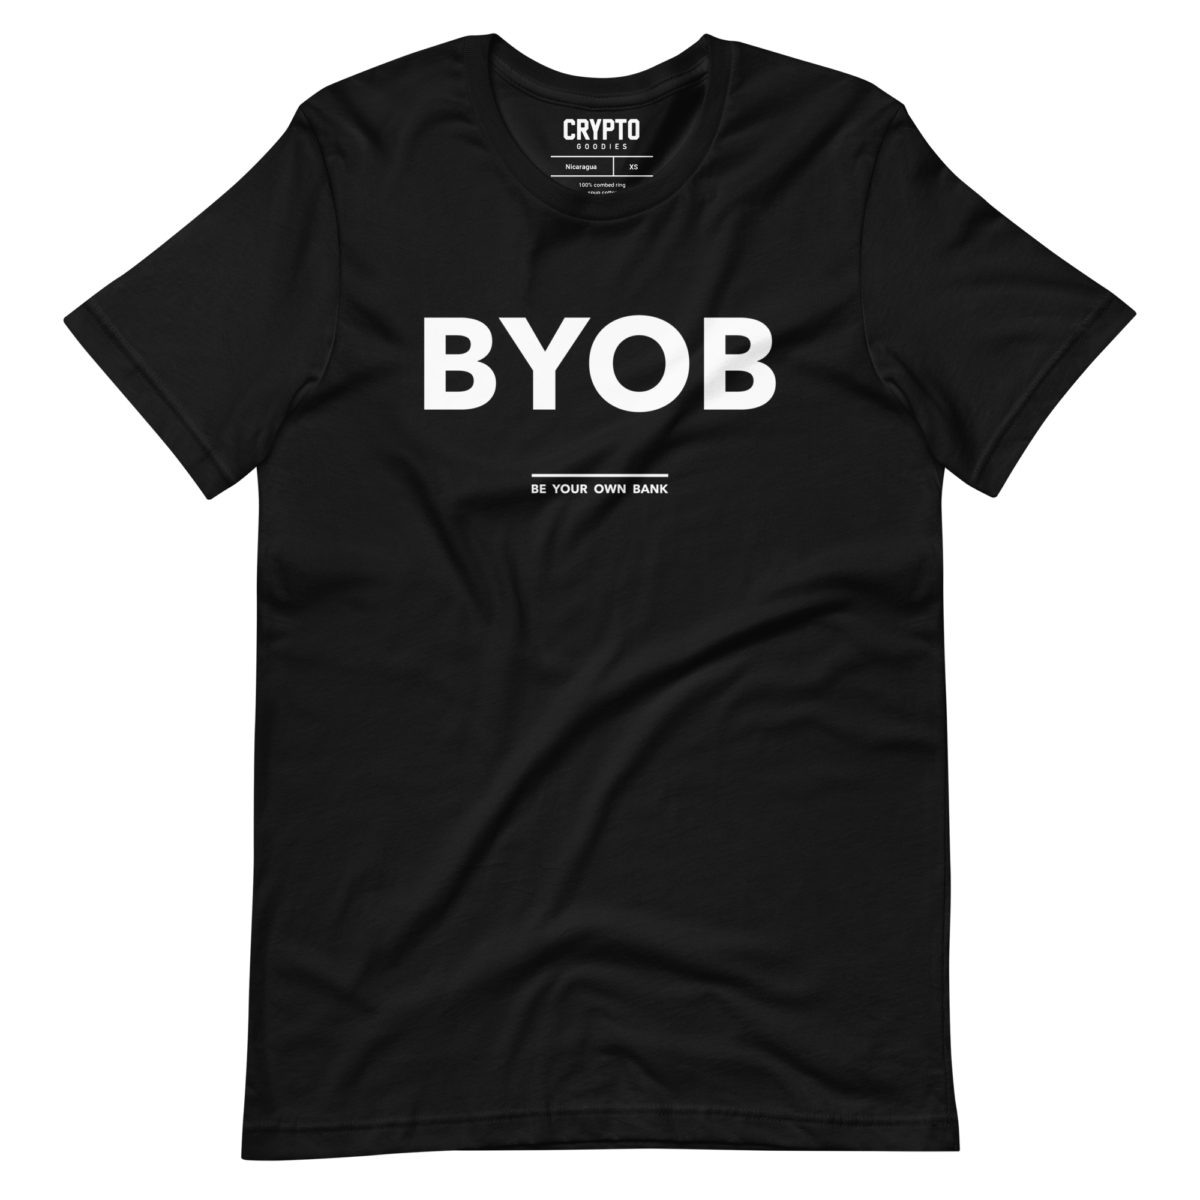 unisex staple t shirt black front 634acd948145d - Be Your Own Bank (BYOB) T-Shirt